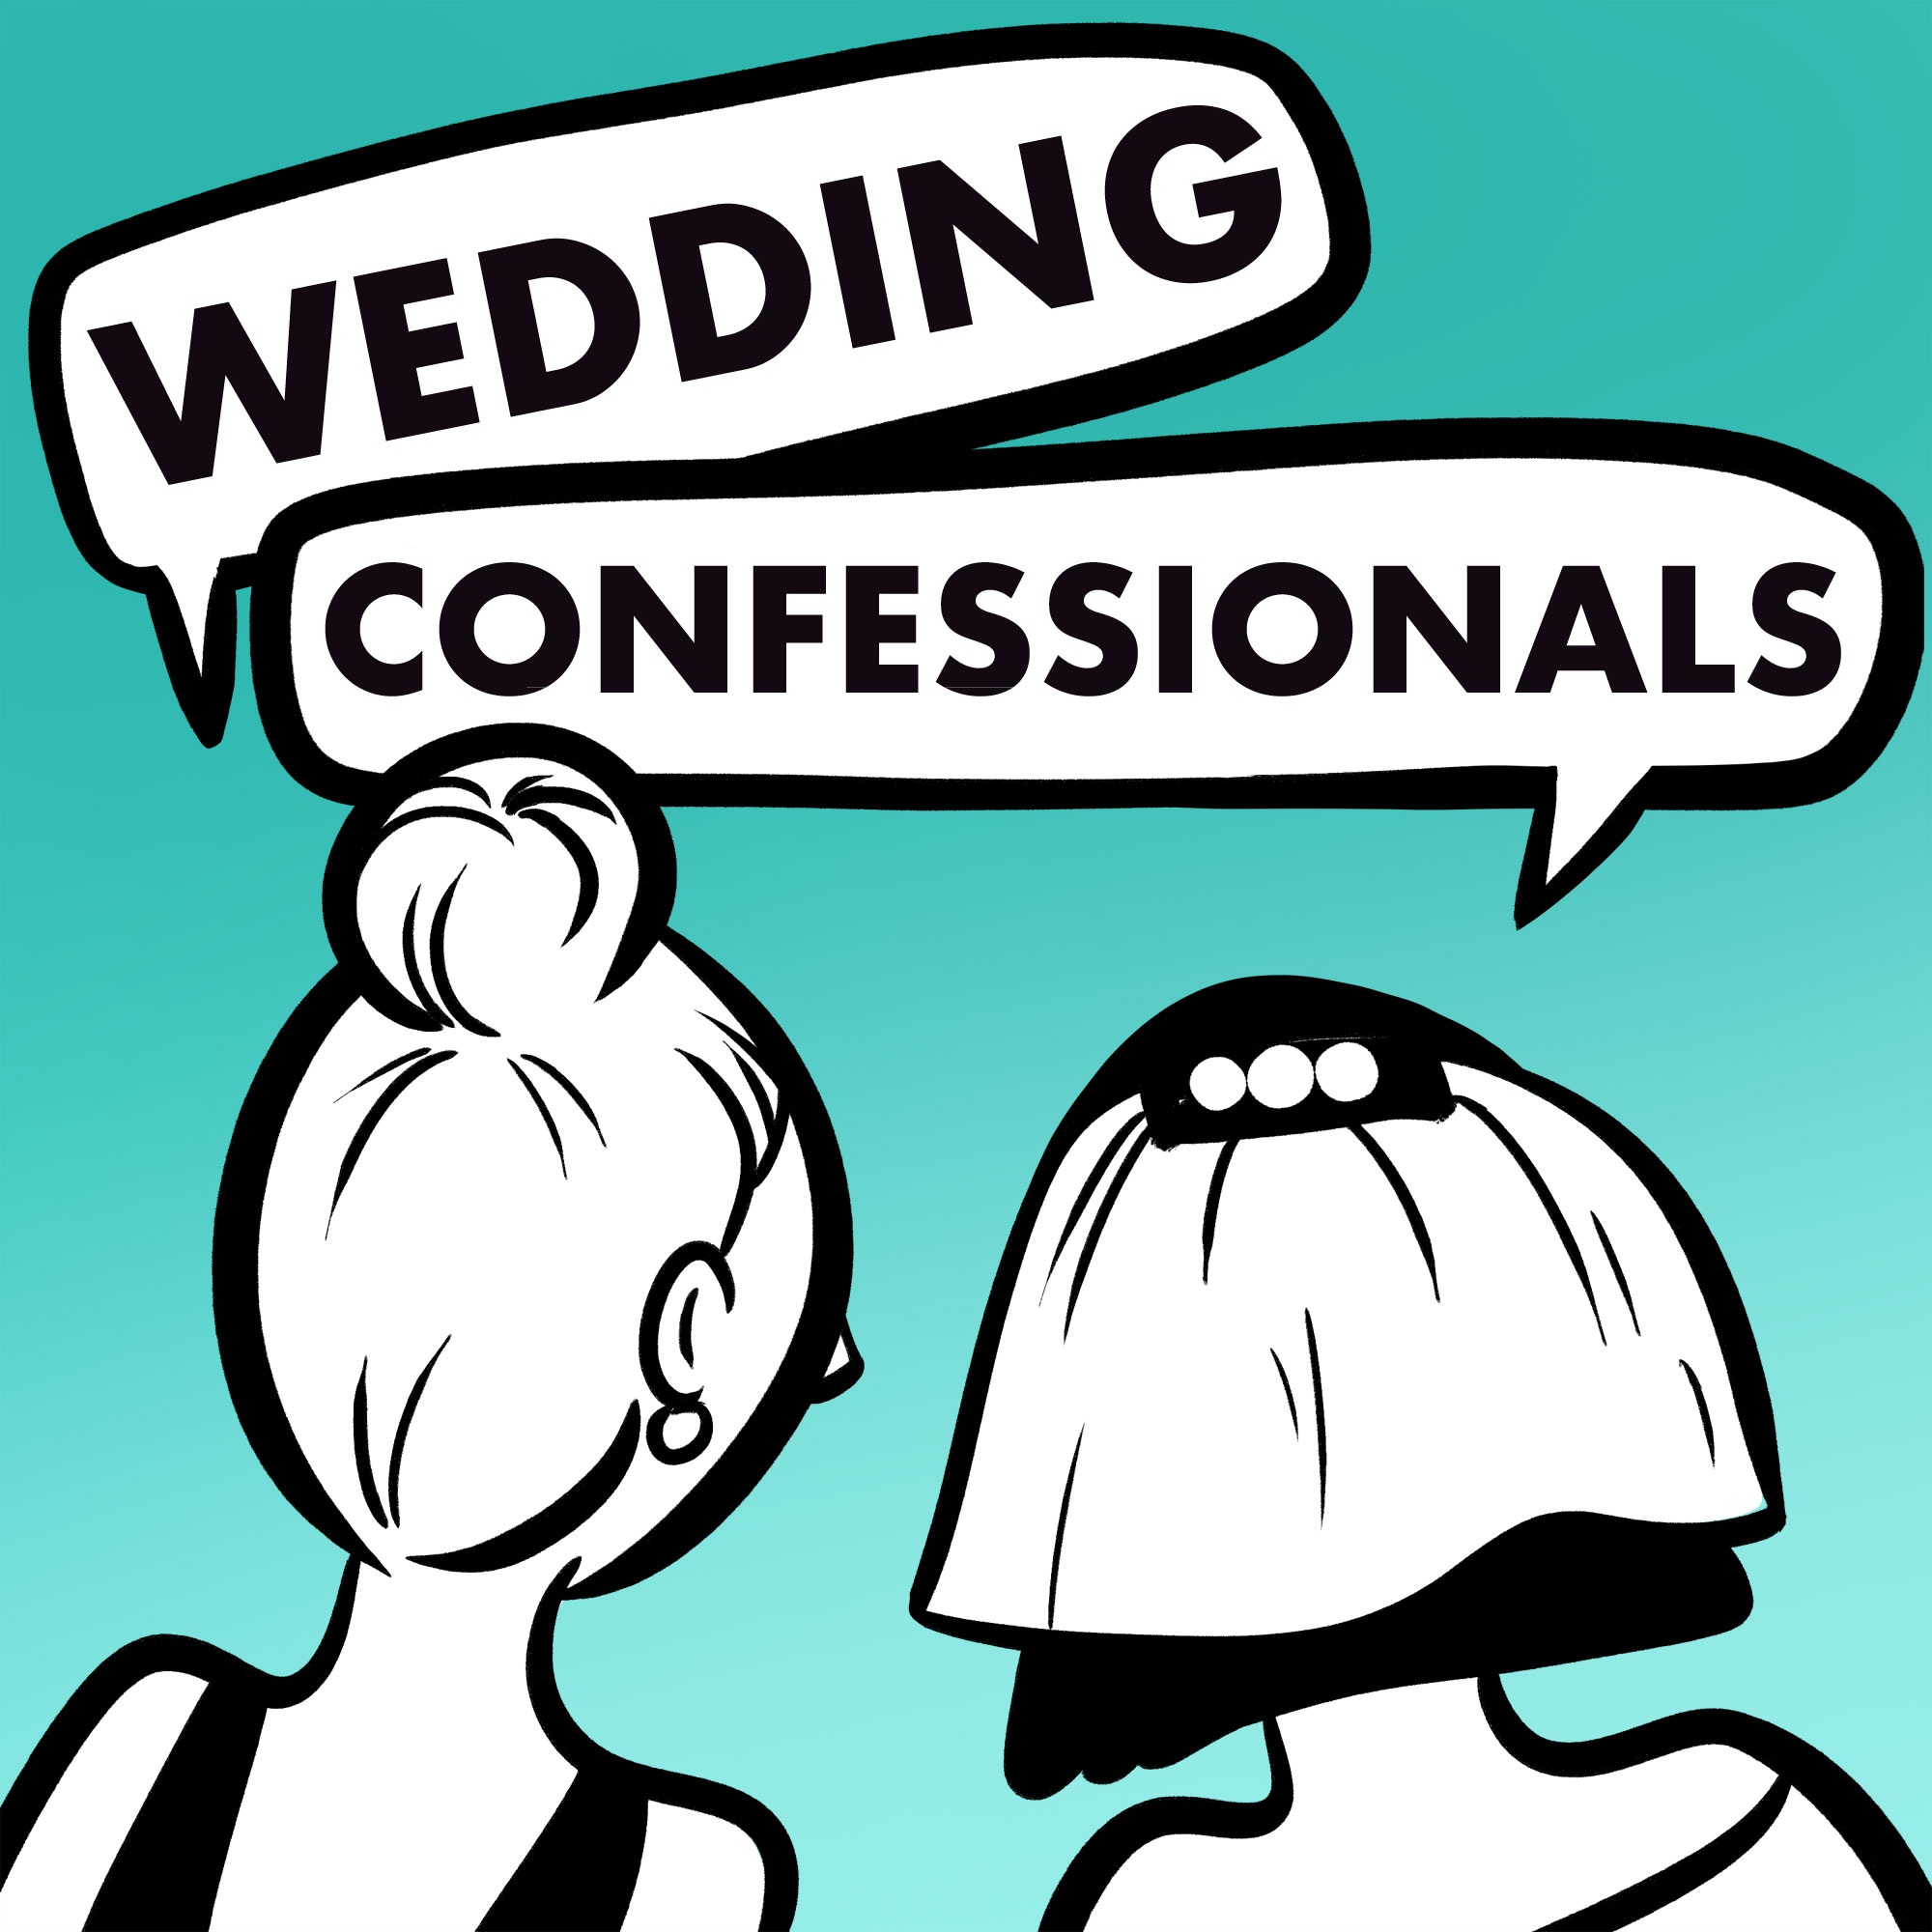 Episode 23: Wedding Trends That Only Vogue Wants You To Avoid